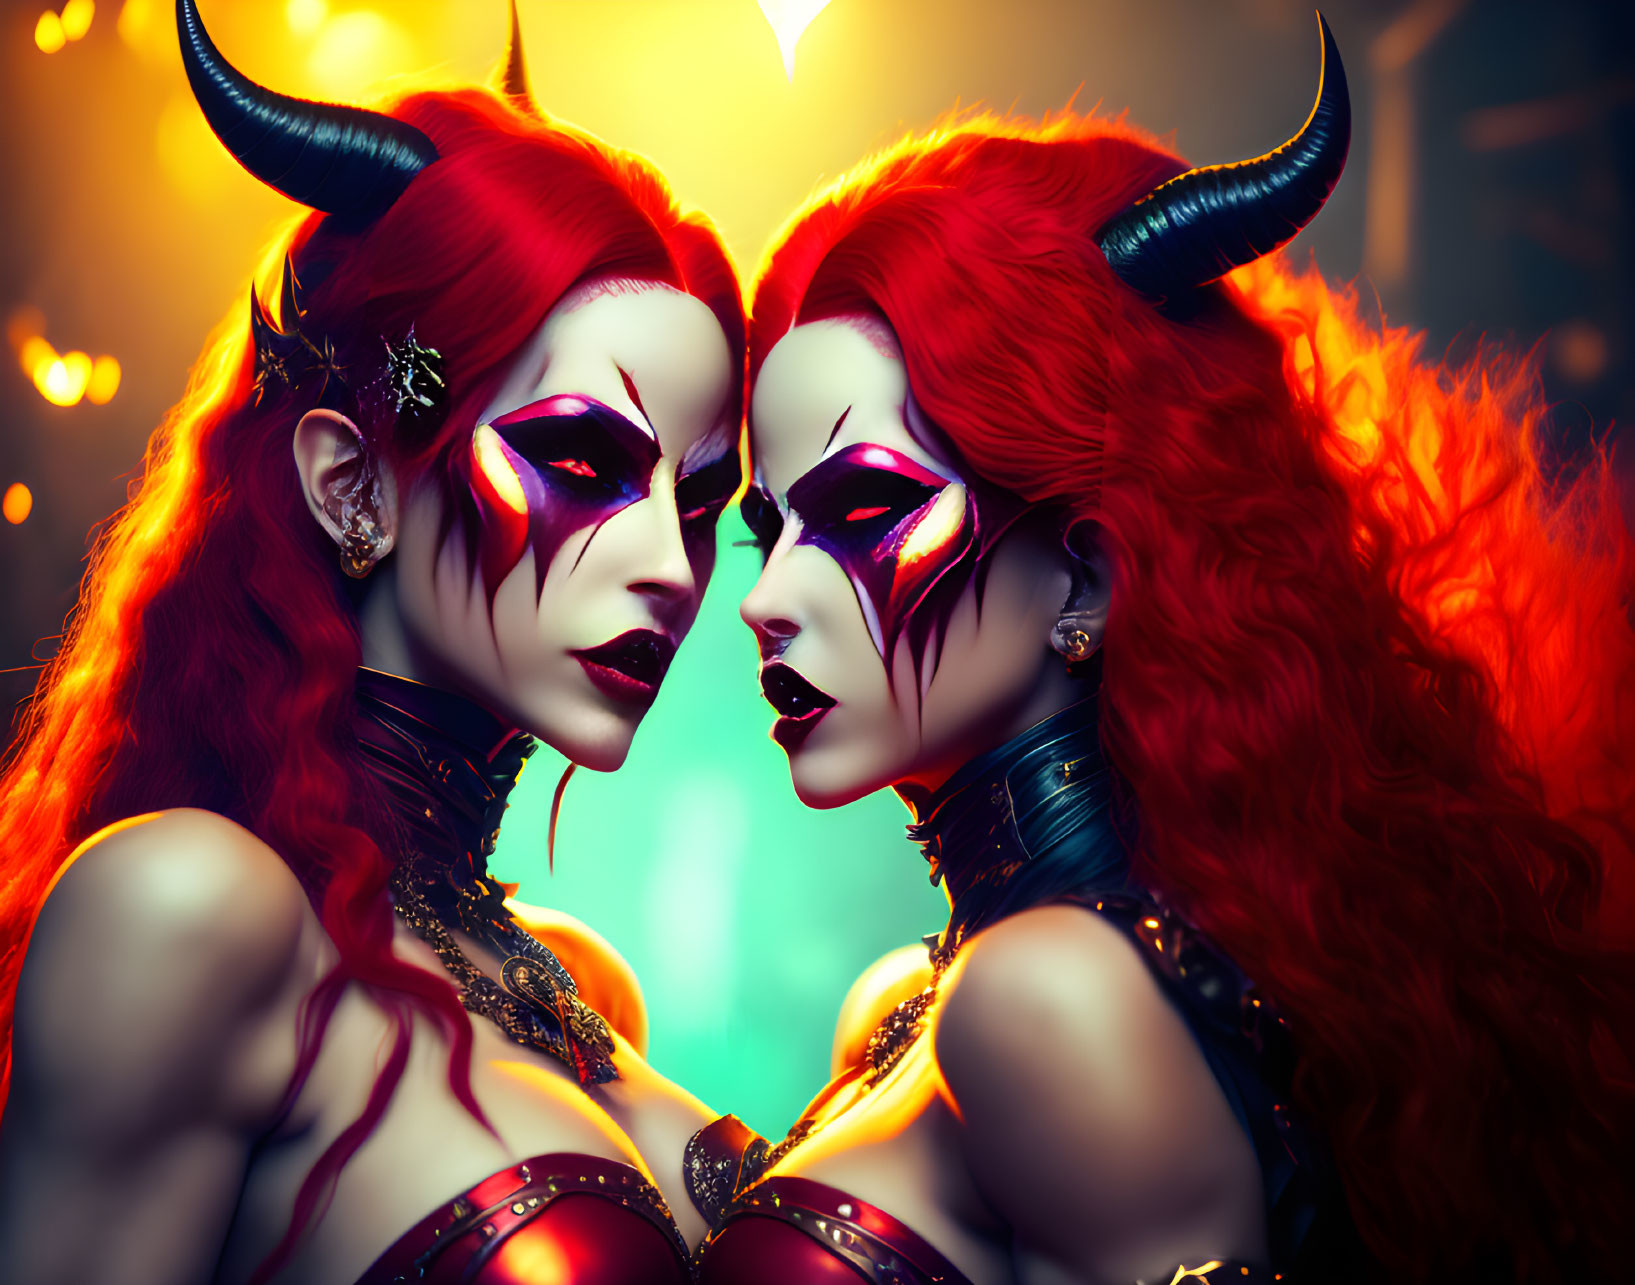 Two women with red hair and demon-style makeup in fantasy setting